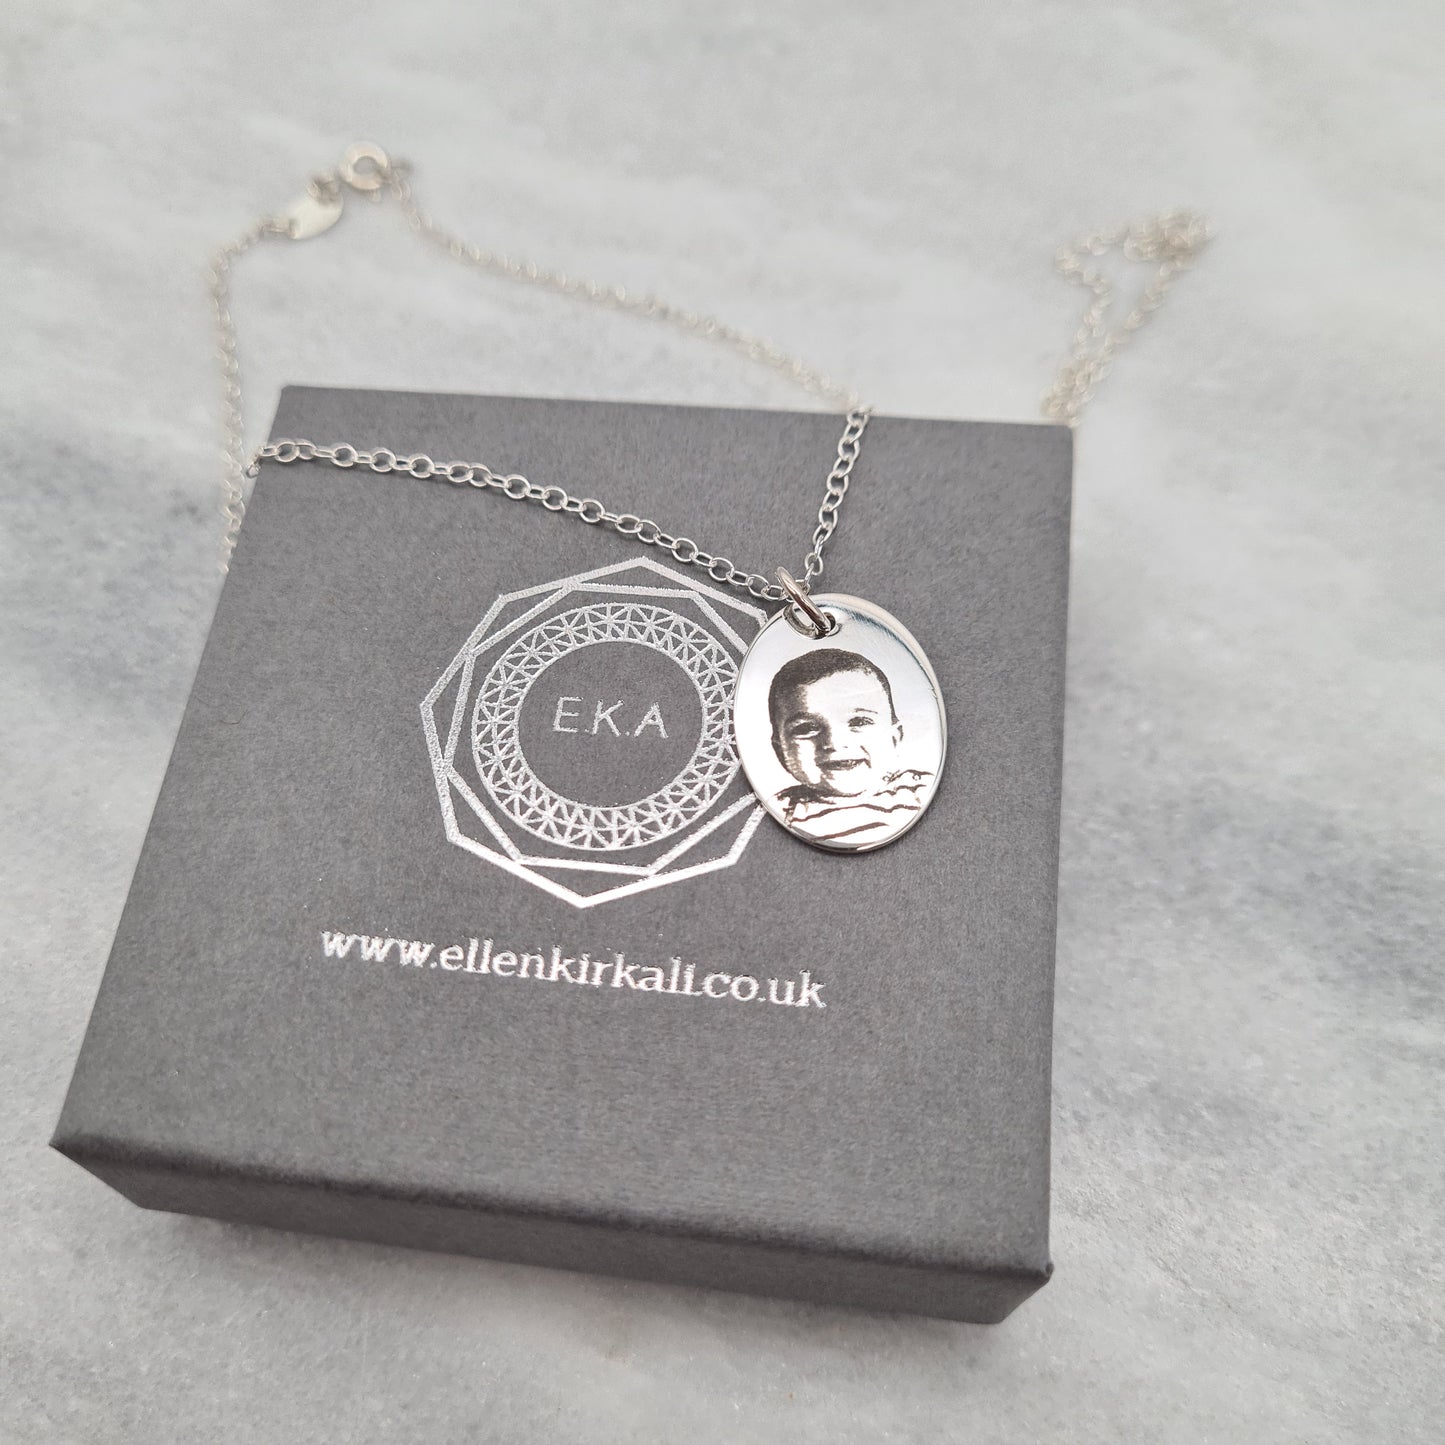 Sterling Silver Photo Pendant Necklace